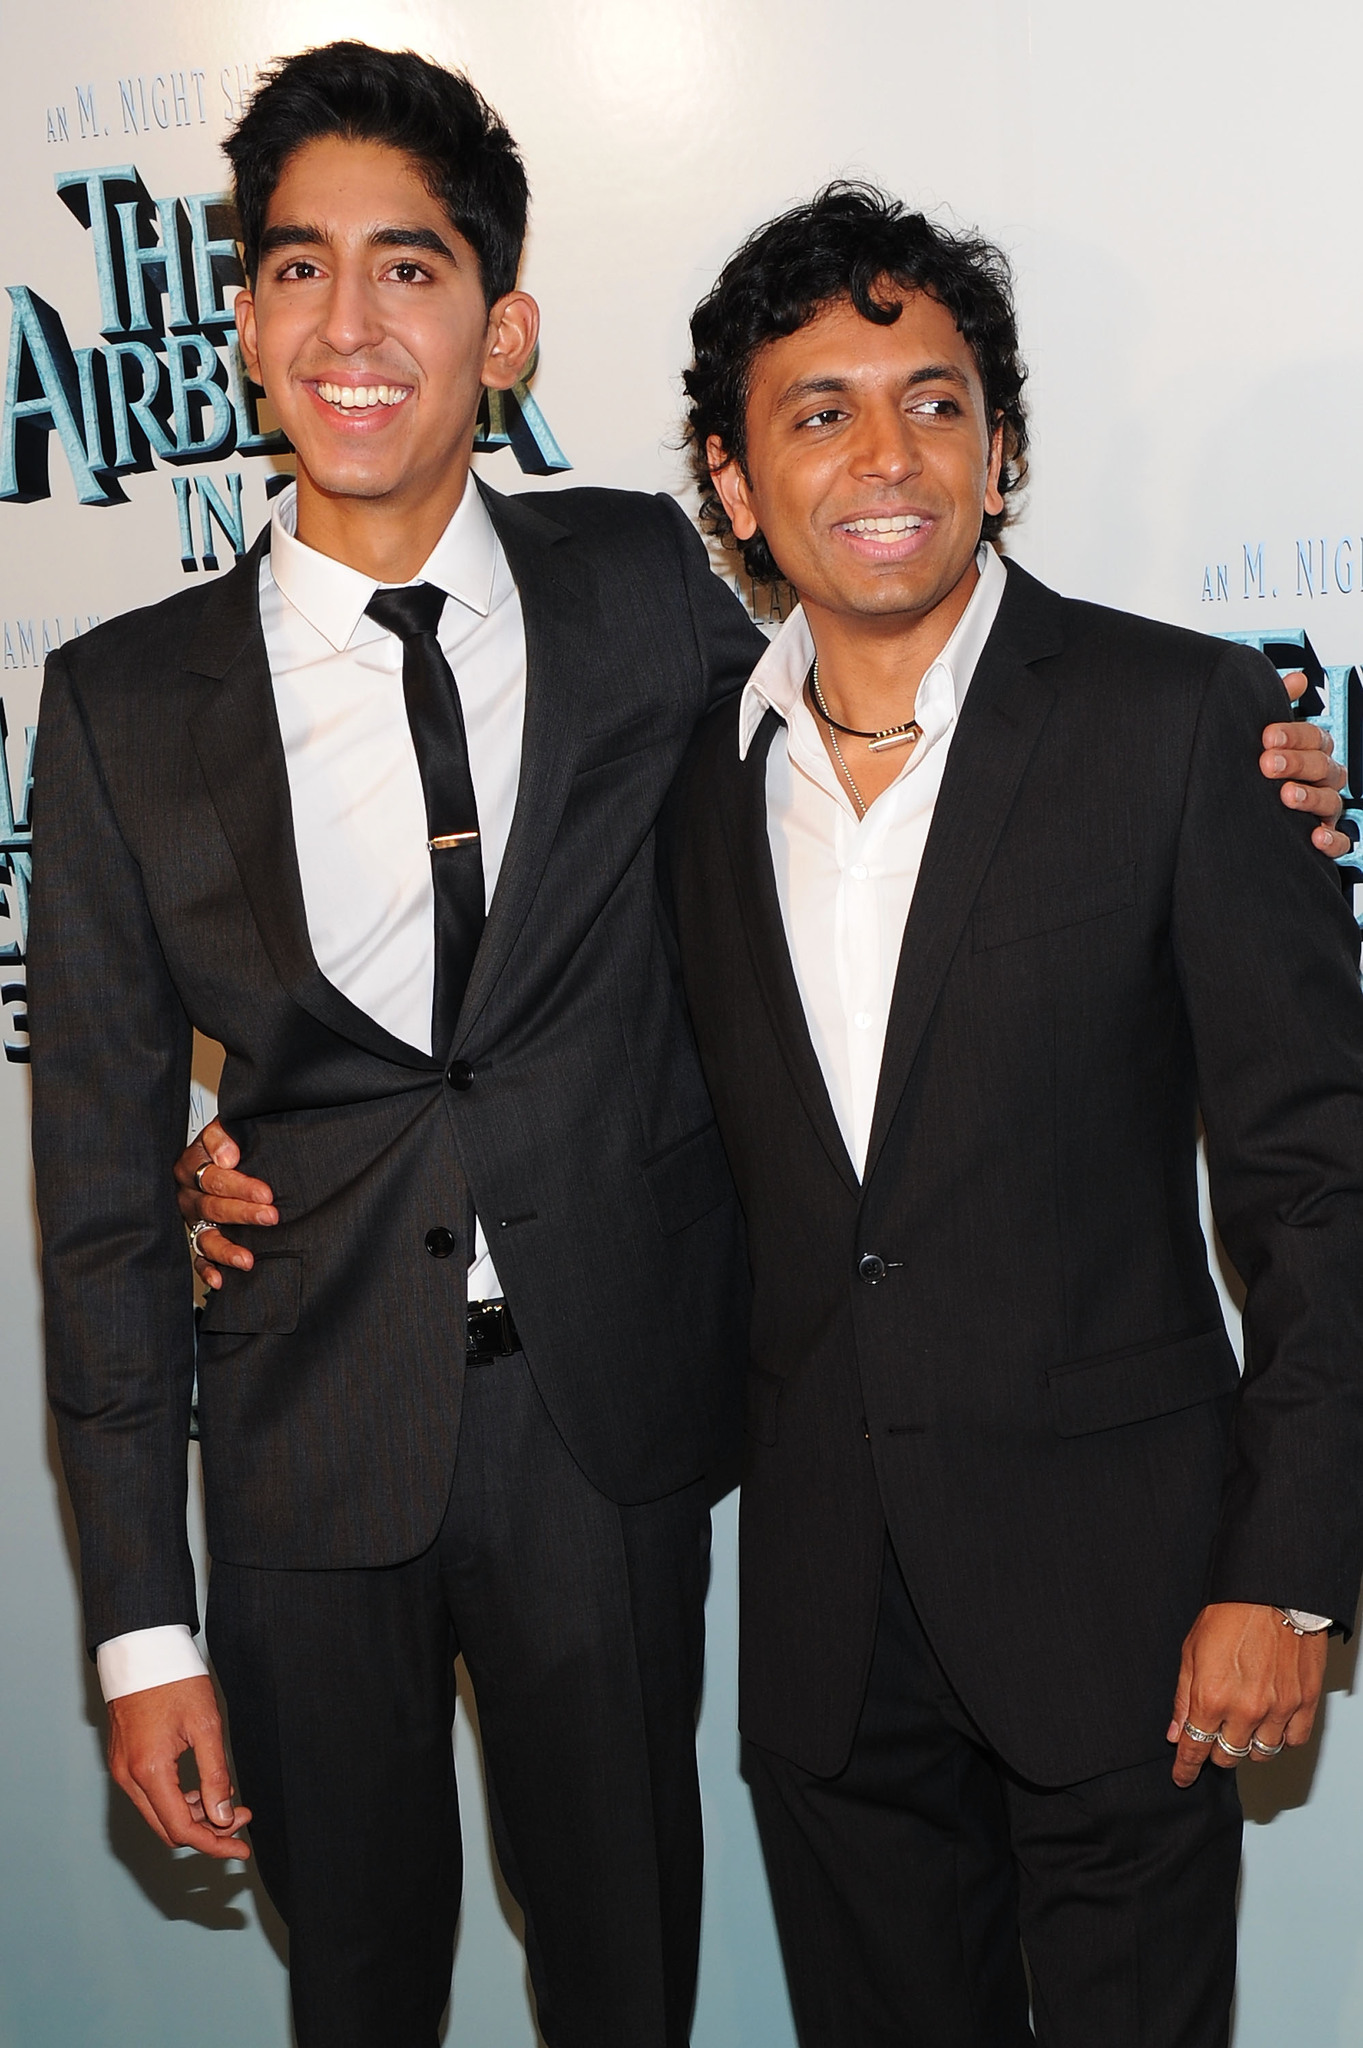 M. Night Shyamalan and Dev Patel at event of The Last Airbender (2010)